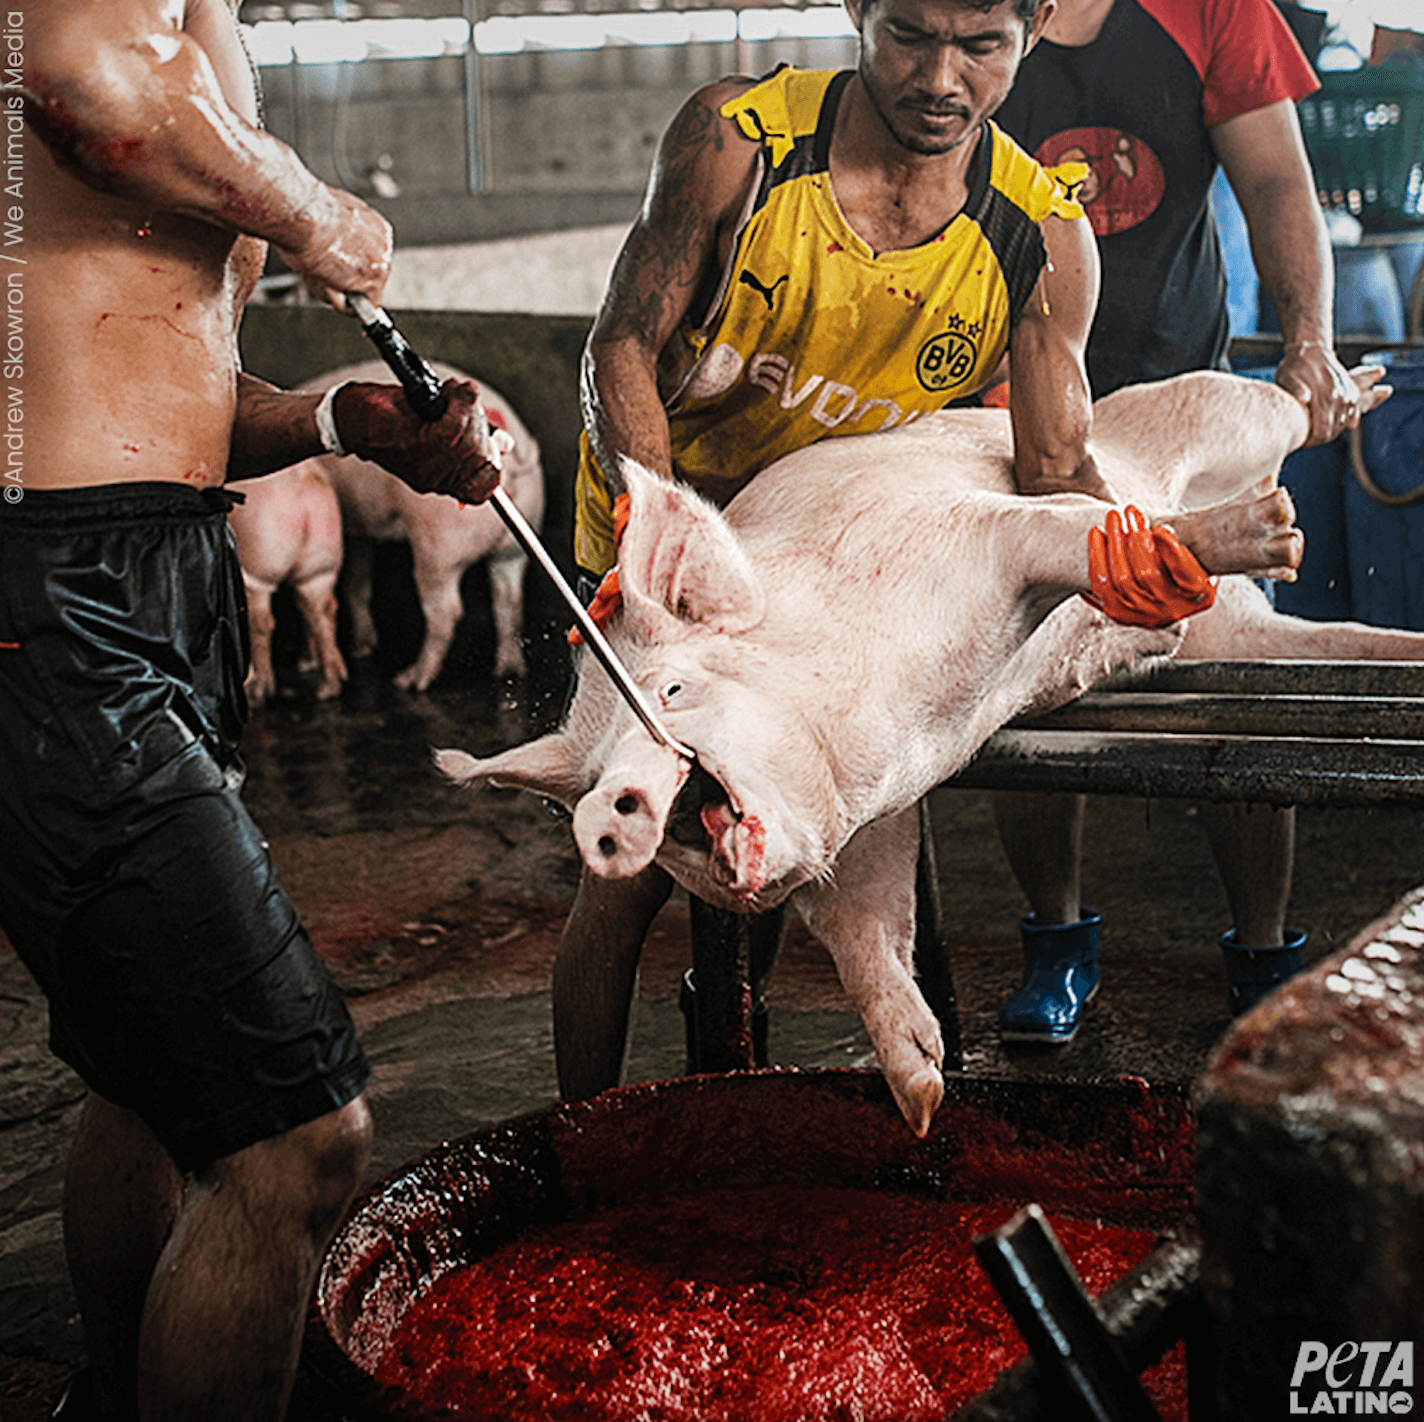  A pig being slaughtered.